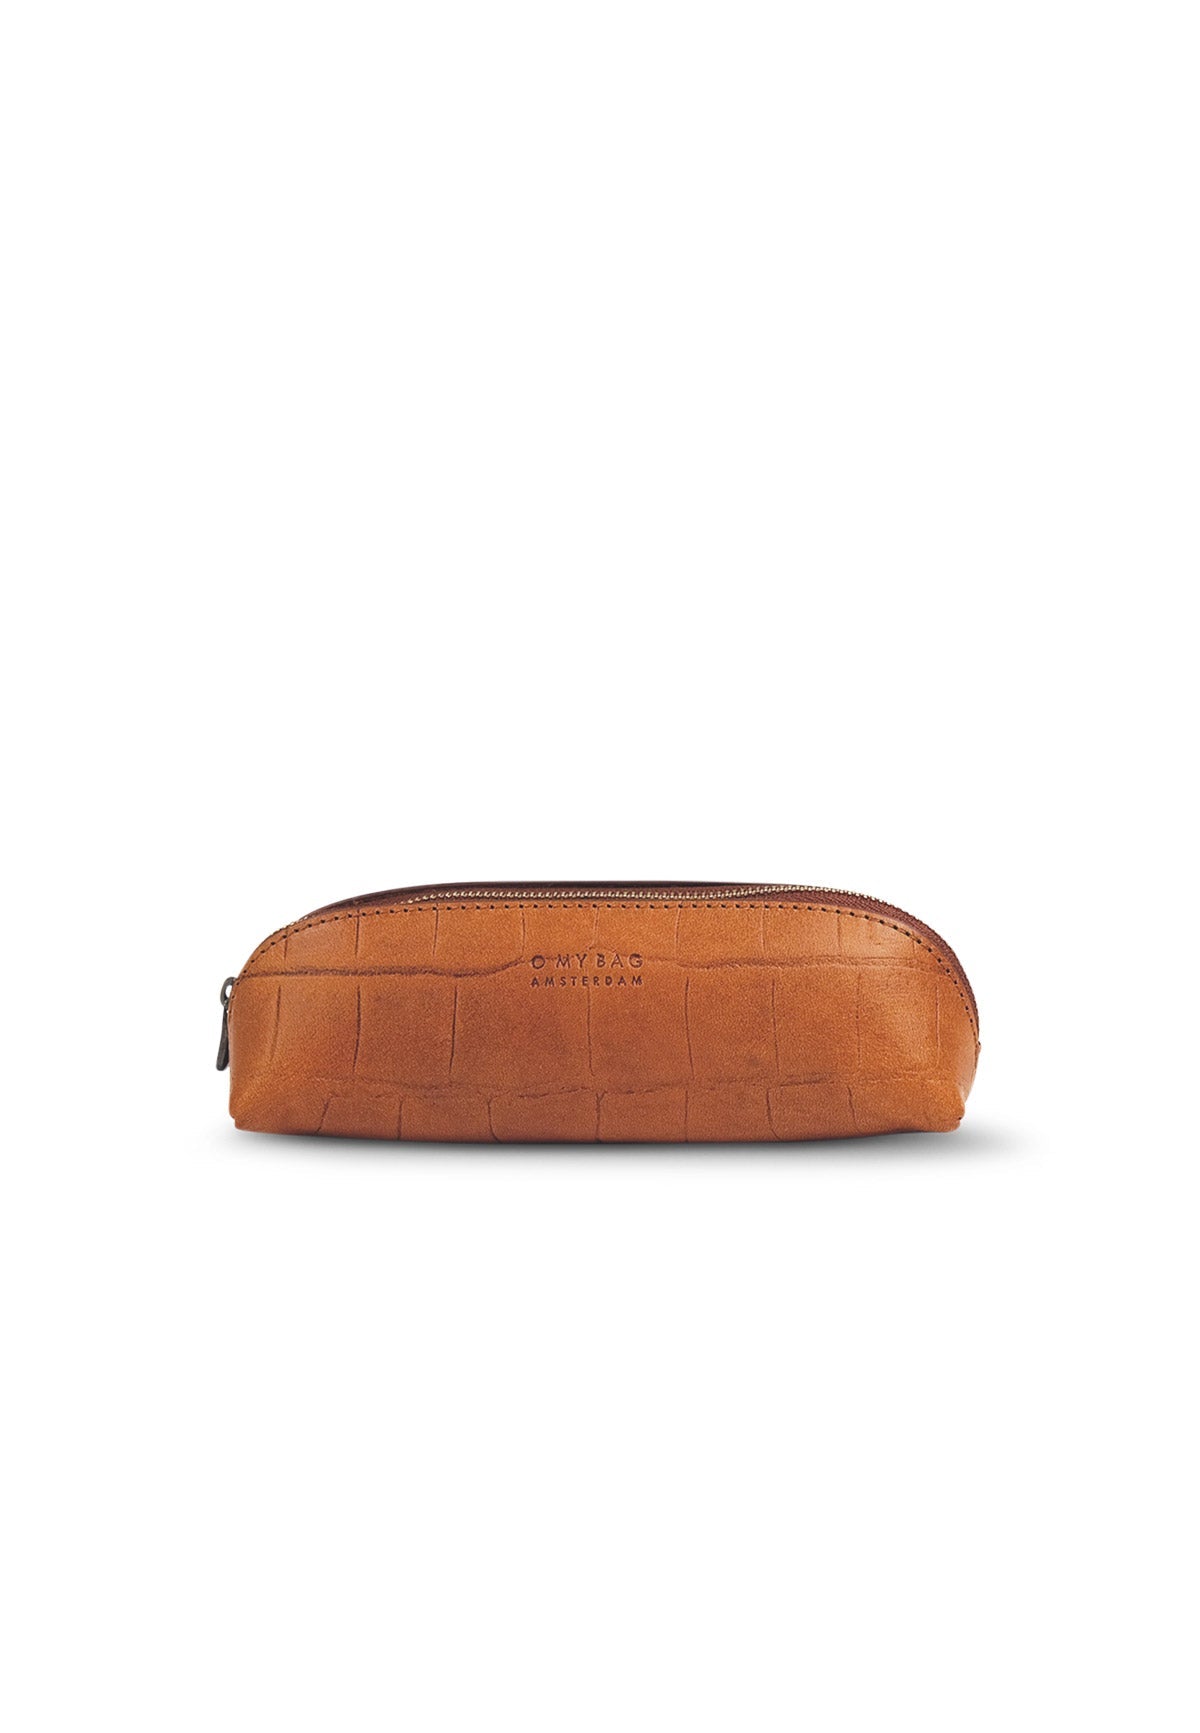 PENCIL CASE SMALL NATURAL CLASSIC LEATHER